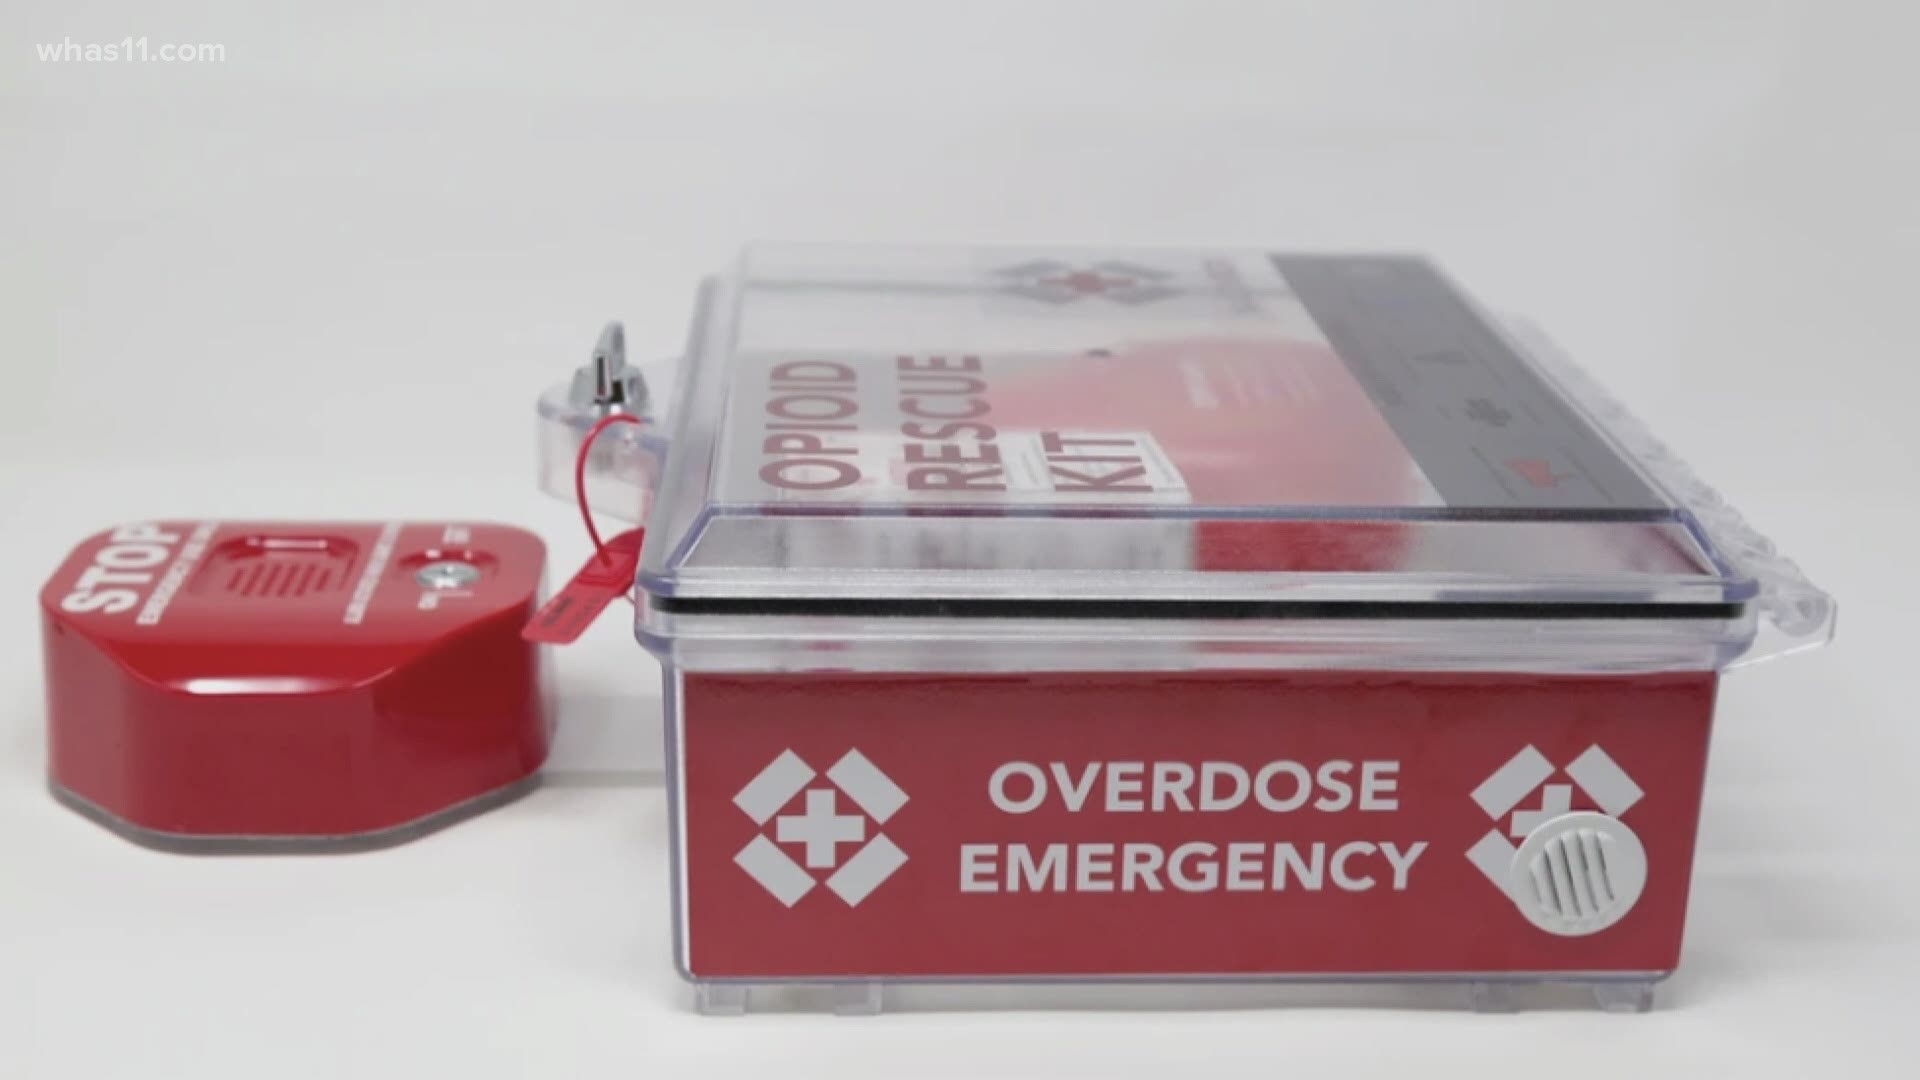 Indiana Governor Eric Holcomb announced a new initiative to place overdose reversal kits in all 92 Indiana Counties.